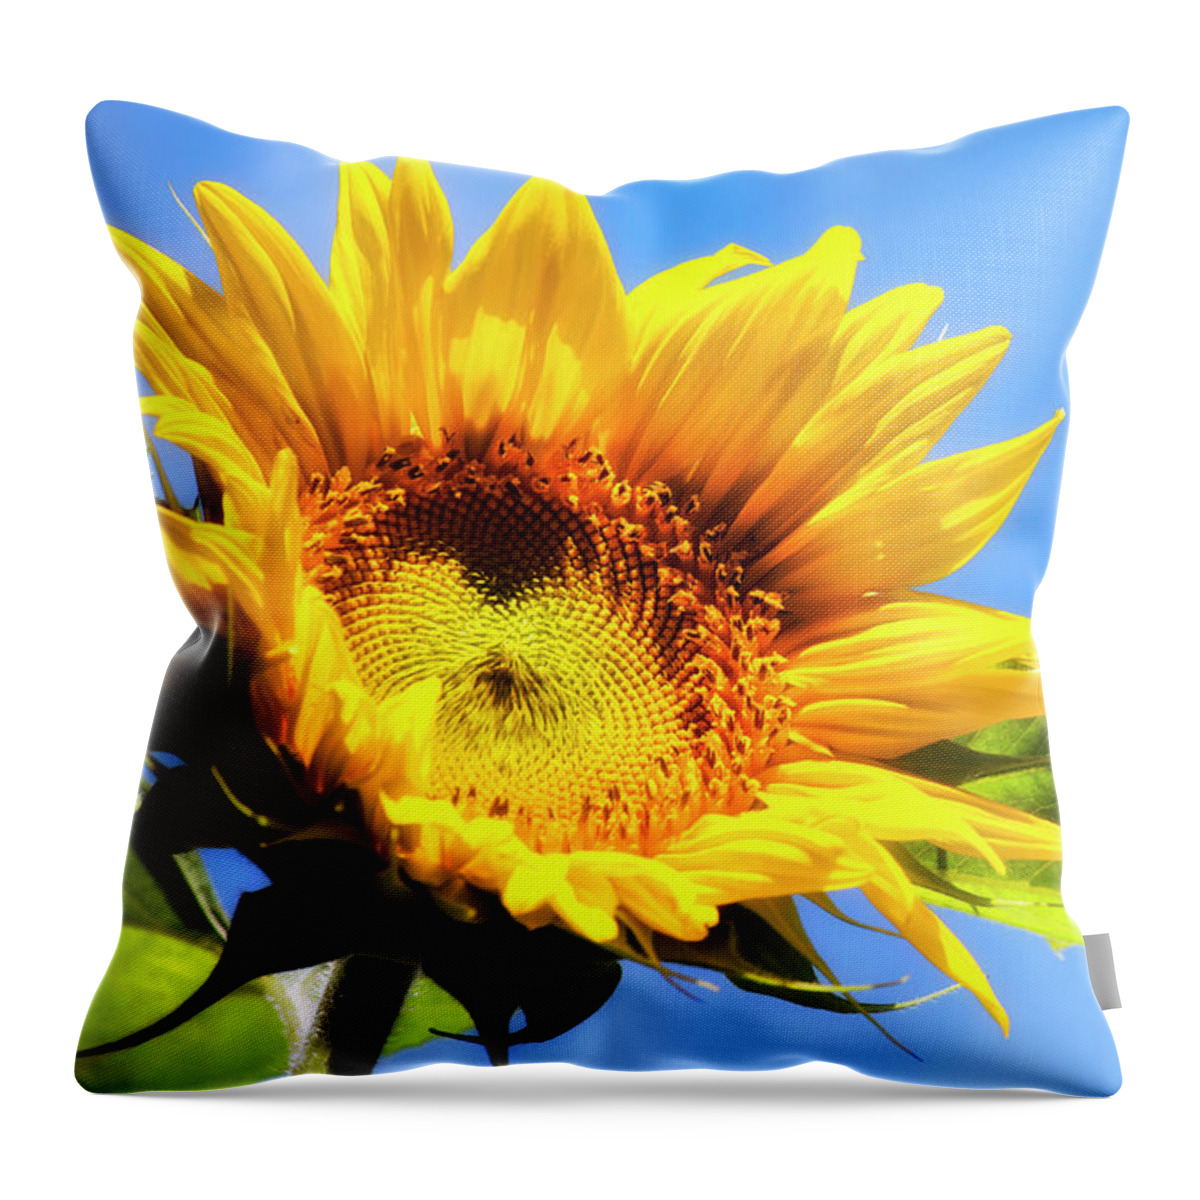 Sunflowers Throw Pillow featuring the photograph Sunflower And Sky by Christina Rollo